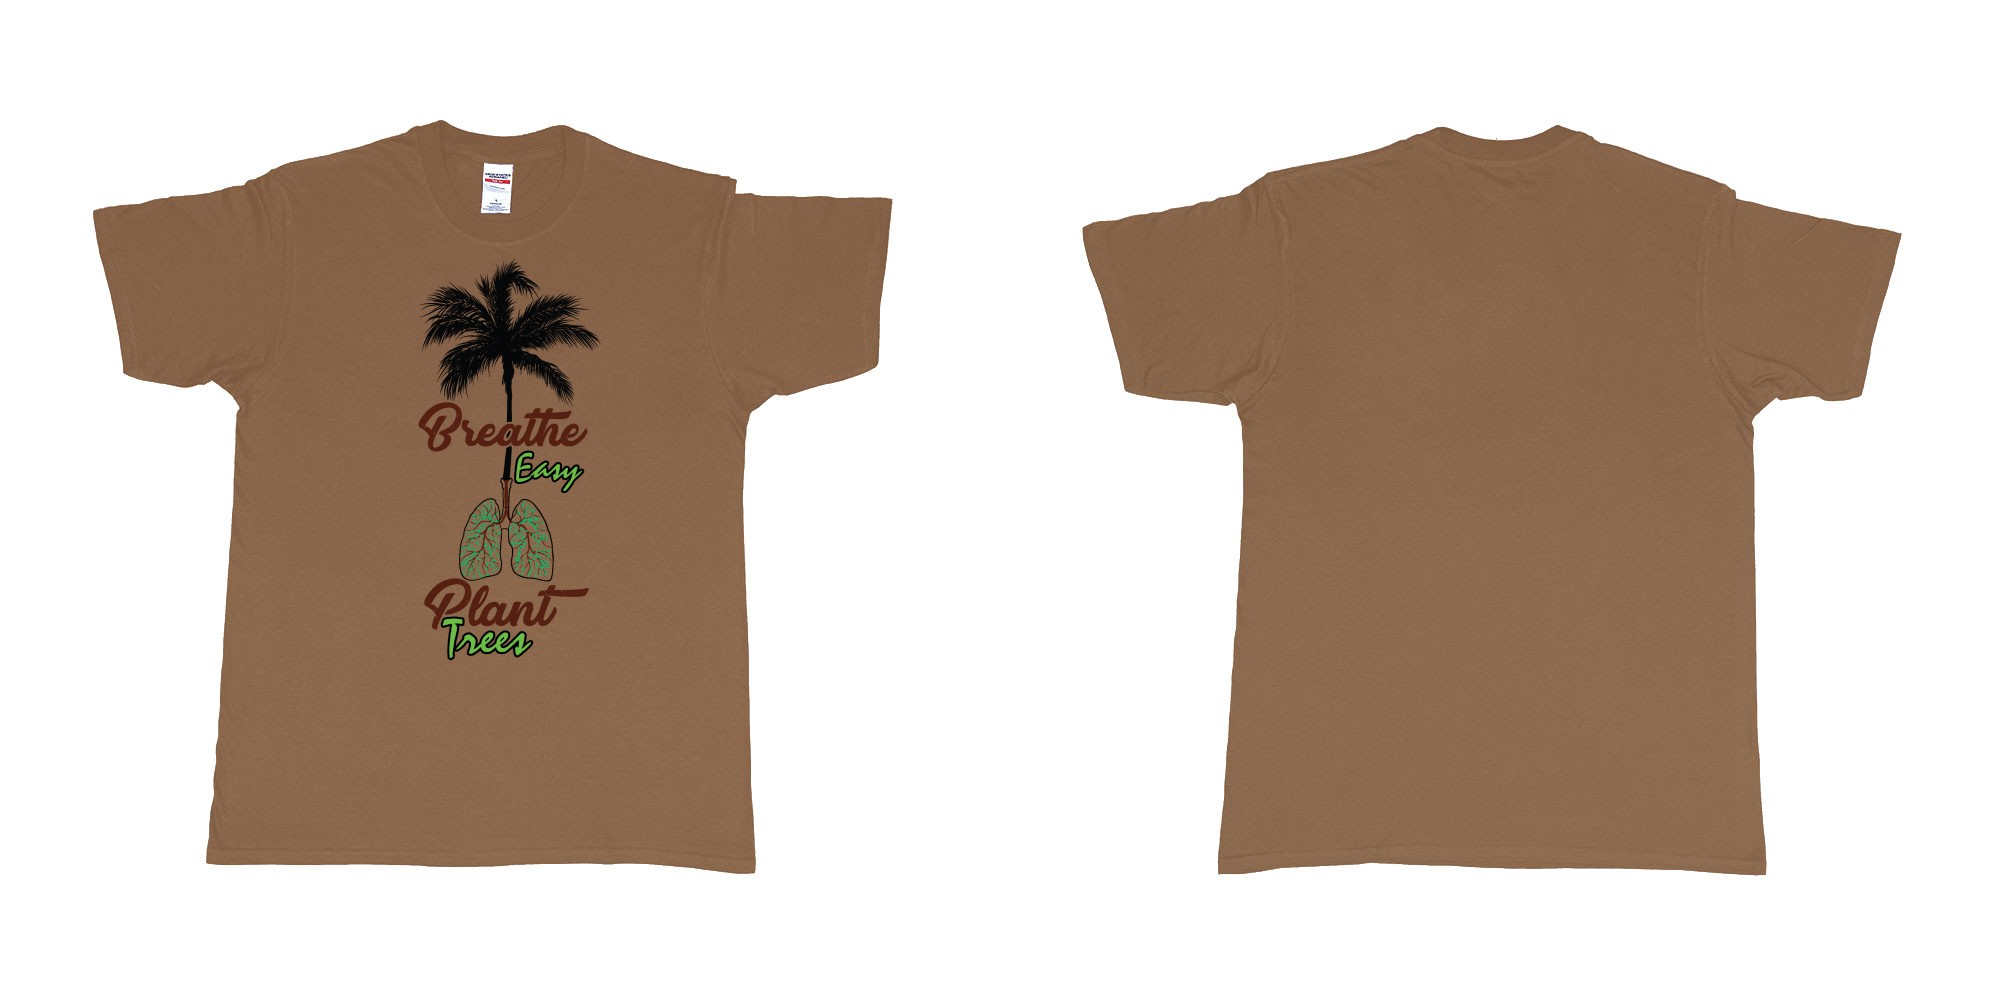 Custom tshirt design breathe easy and plant a tree for better air for everyone in fabric color chestnut choice your own text made in Bali by The Pirate Way